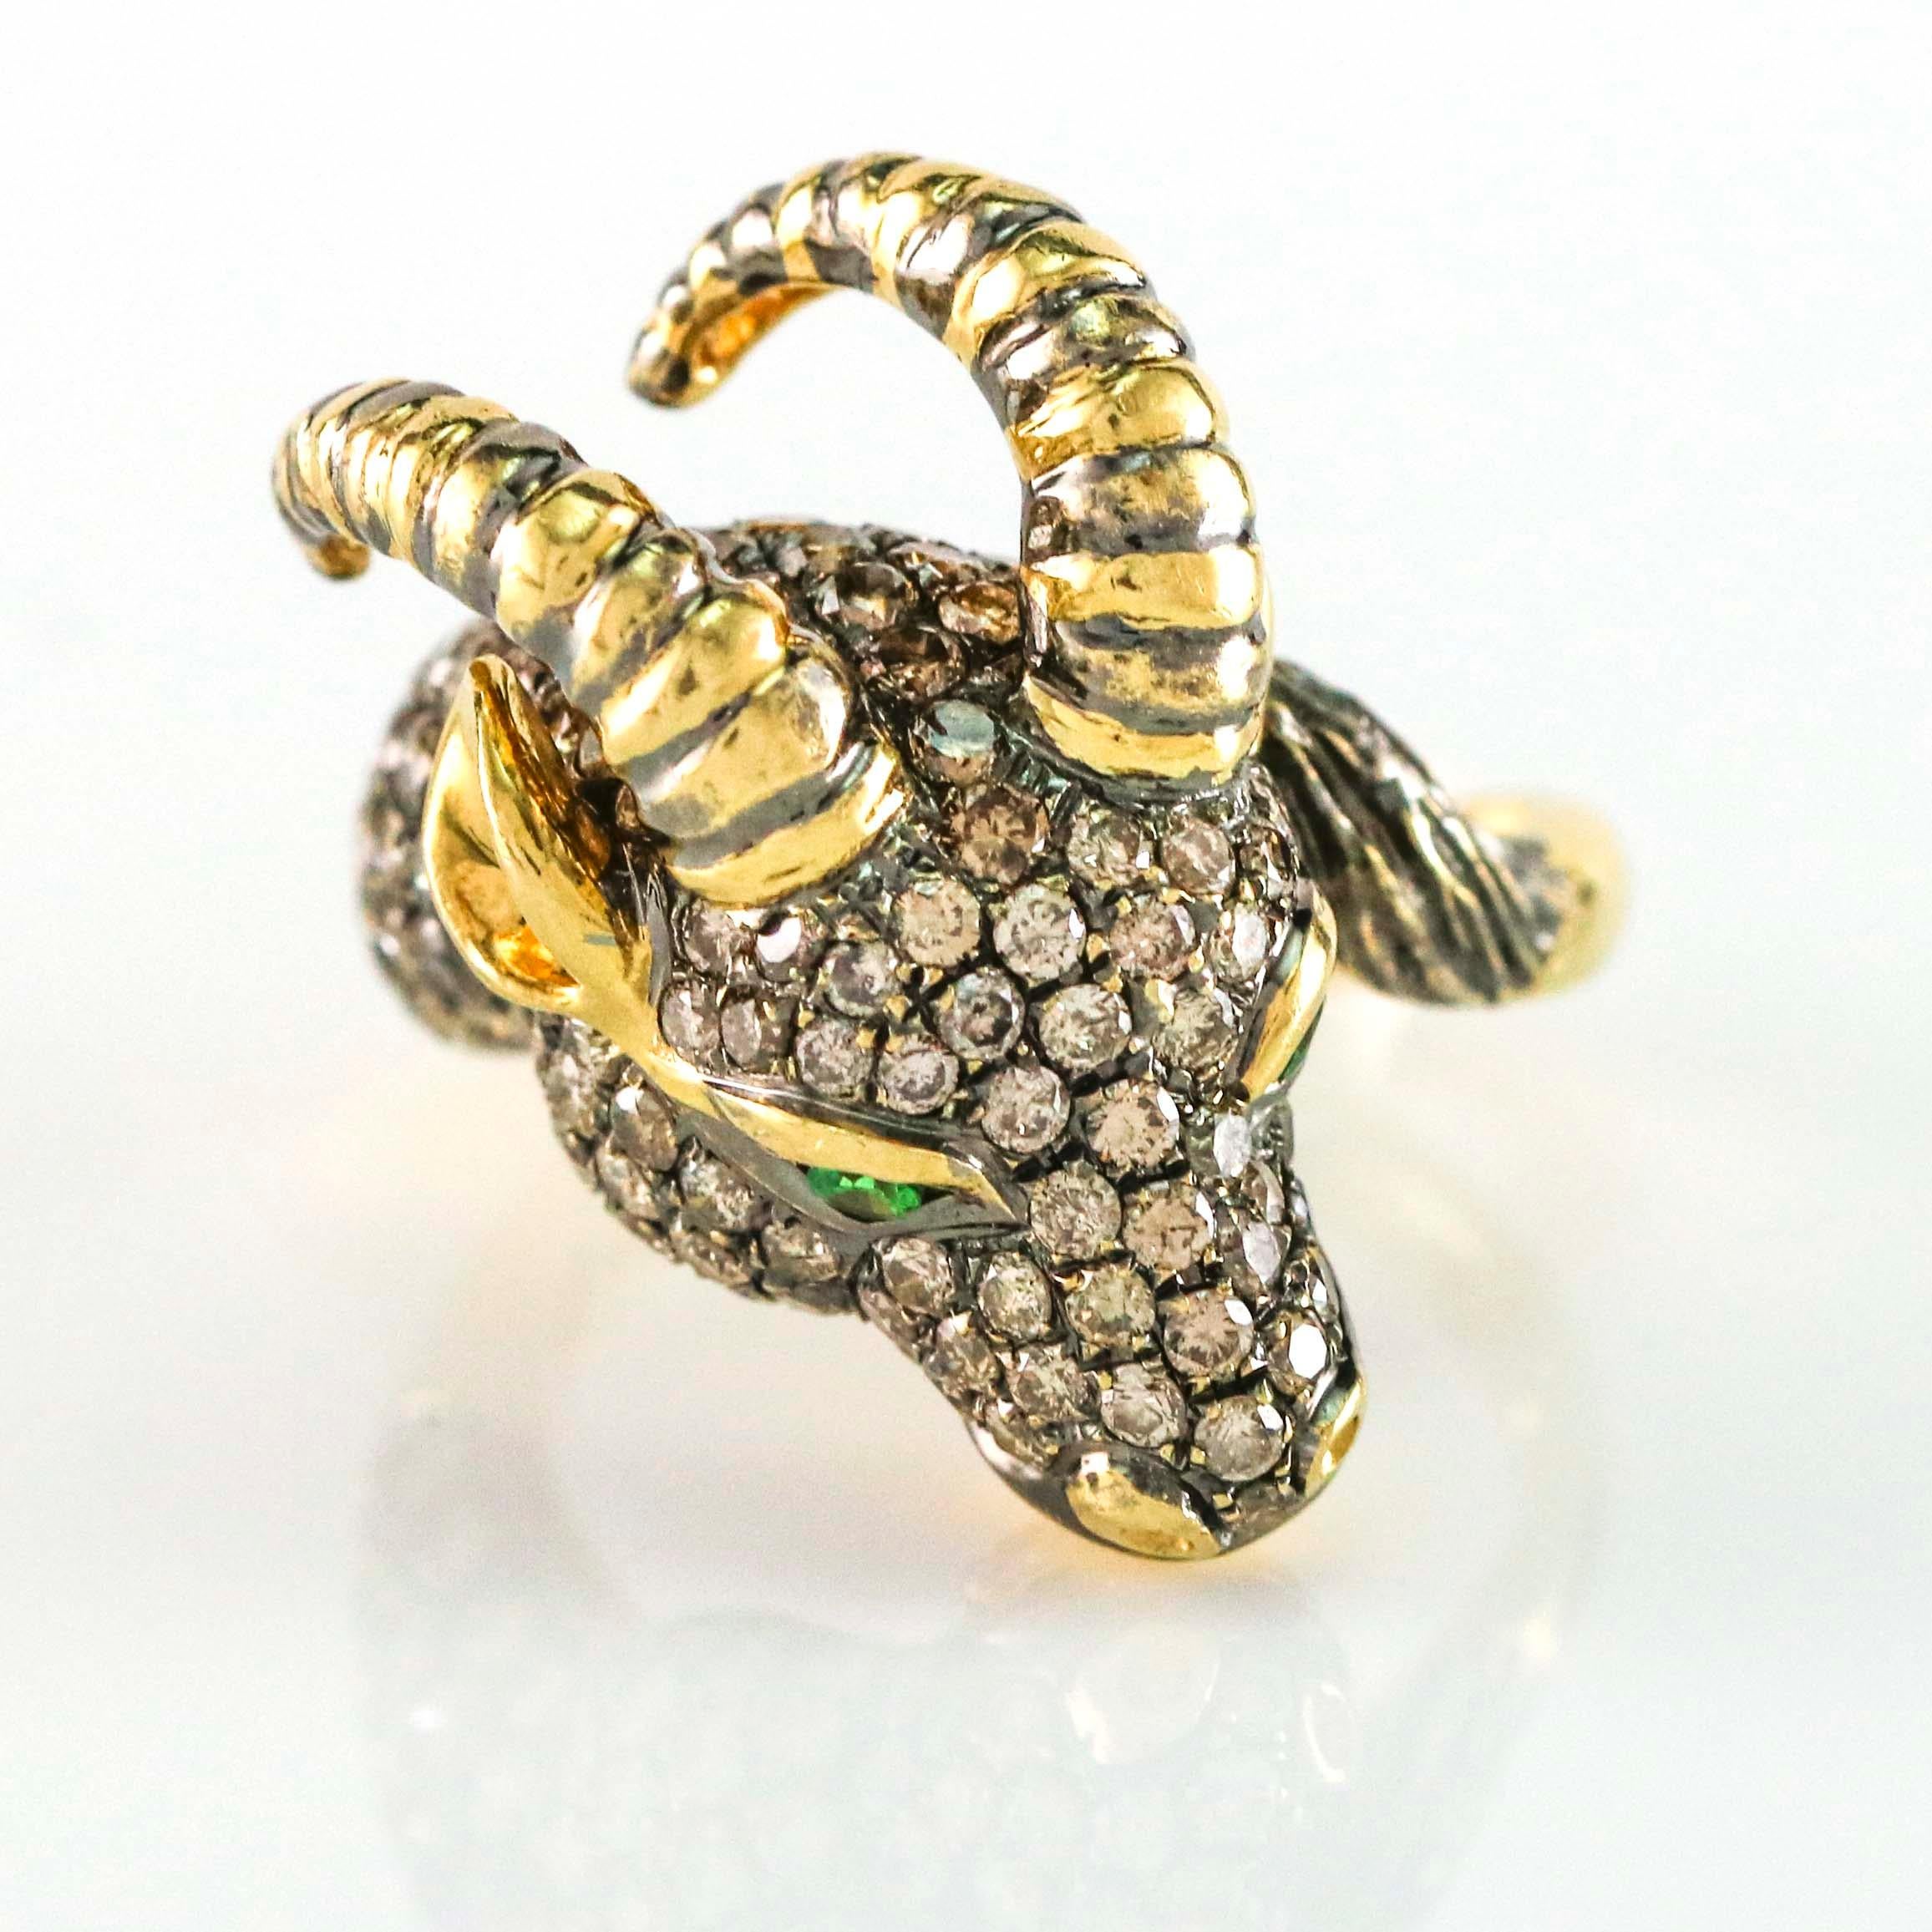 Goats head cocktail ring crafted in 18k yellow gold encrusted with champagne diamonds. Emerald eyes. Size 7.5. Fashion statement piece. 